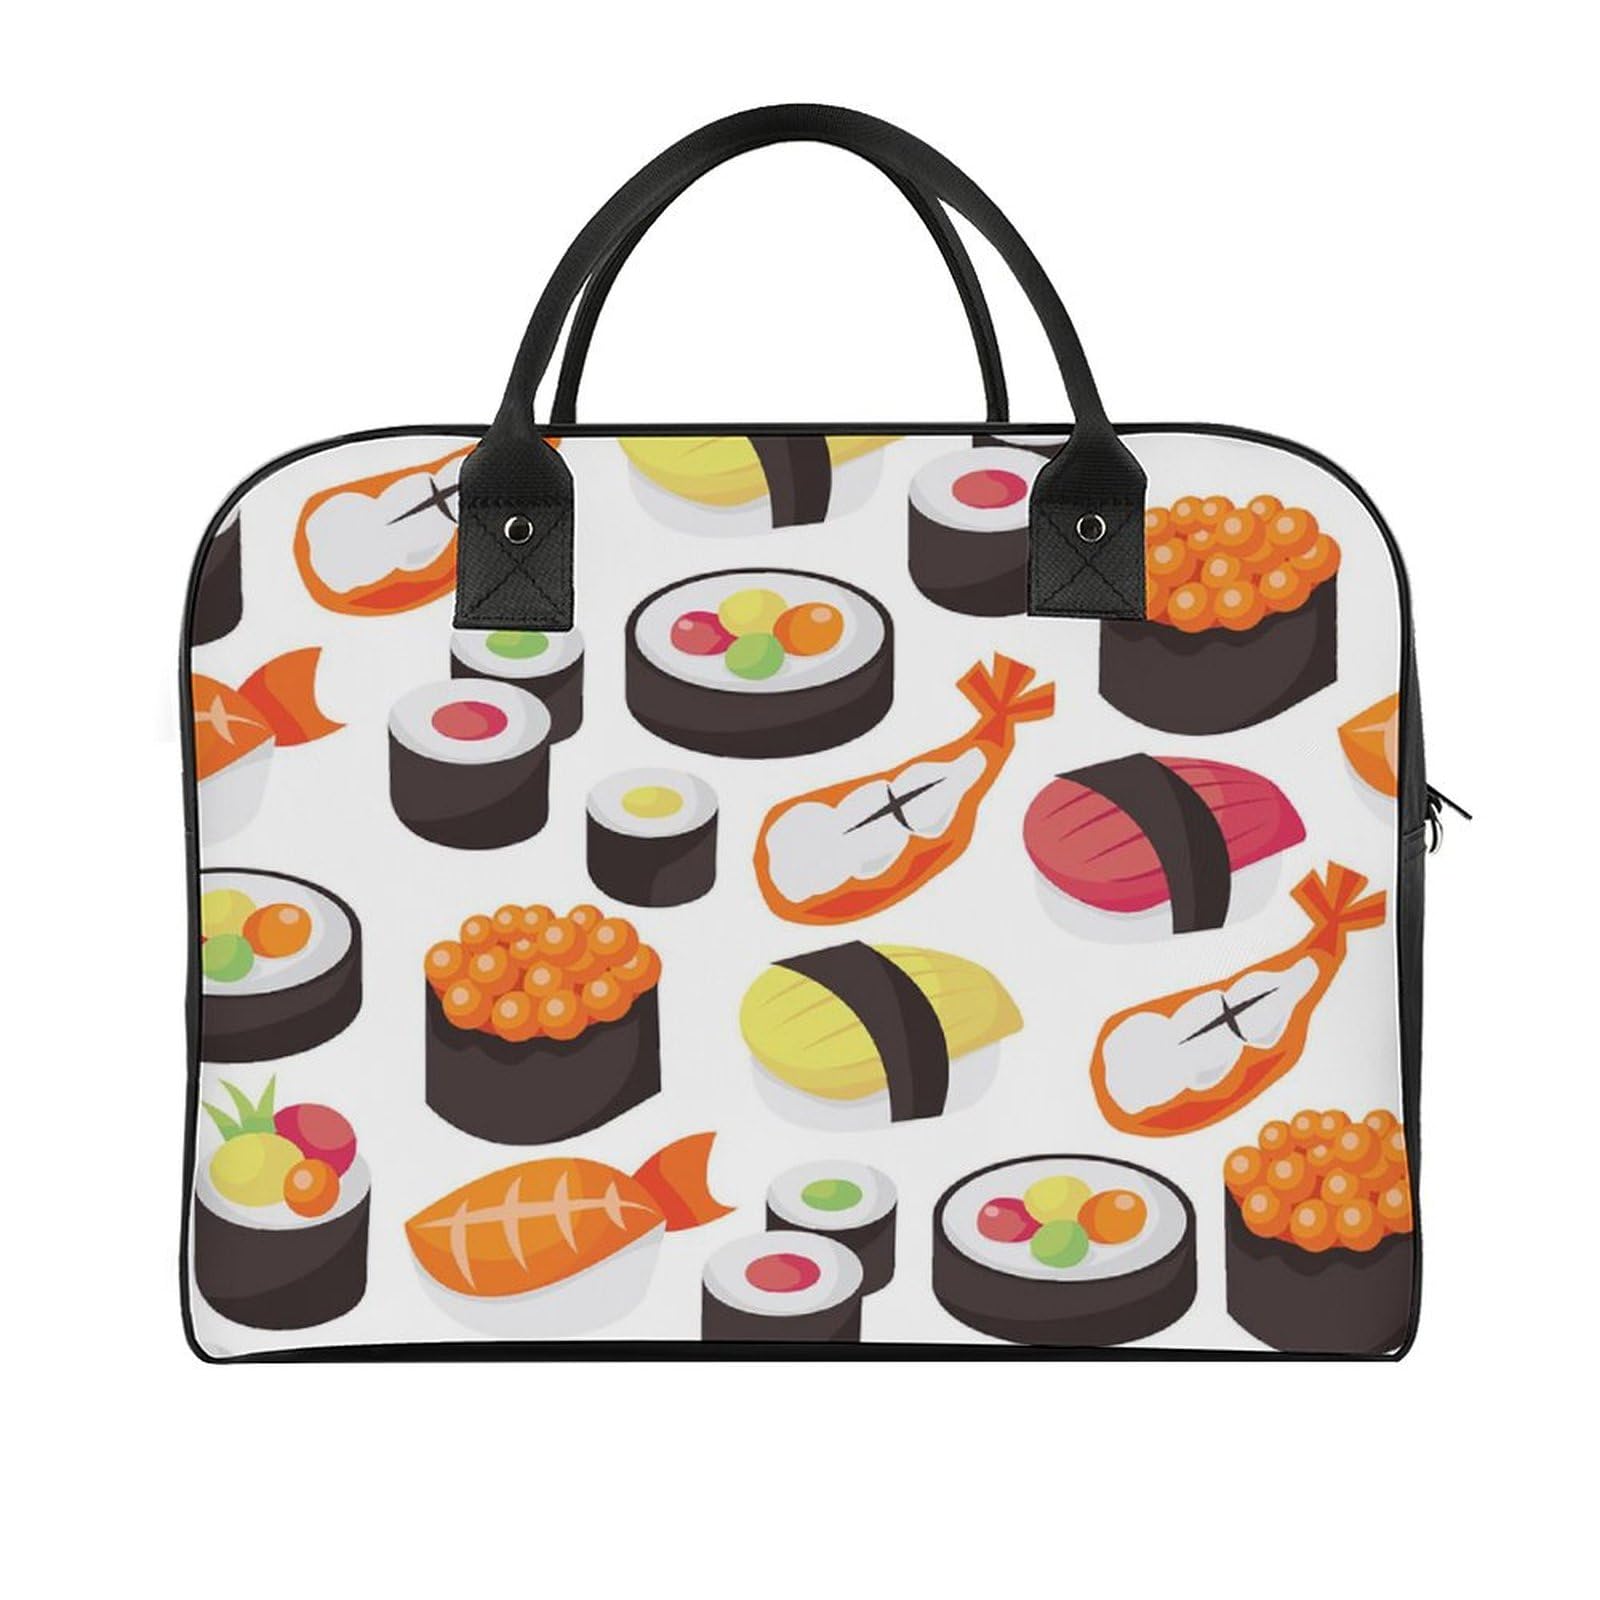 Delicious Sushi Large Crossbody Bag Laptop Bags Shoulder Handbags Tote with Strap for Travel Office